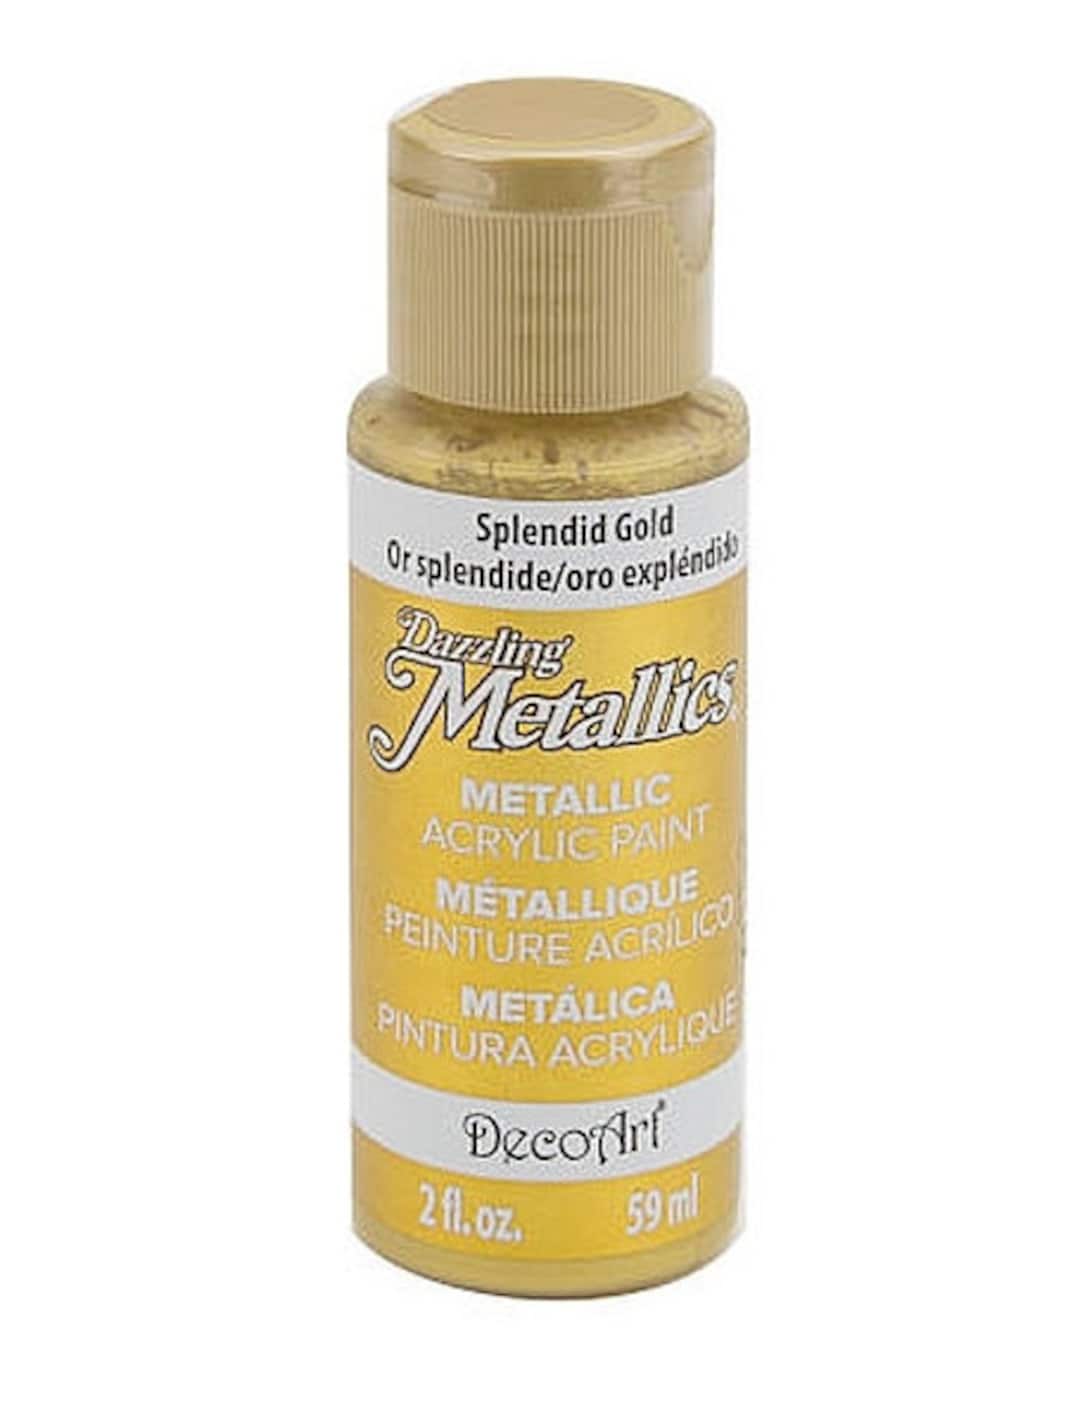 DecoArt Americana Metallics 24K Gold Paint, 3 Pack 8oz Metallic 24K Gold  Acrylic Paint - Water Based Multi Surface Paint for Arts and Crafts, Home